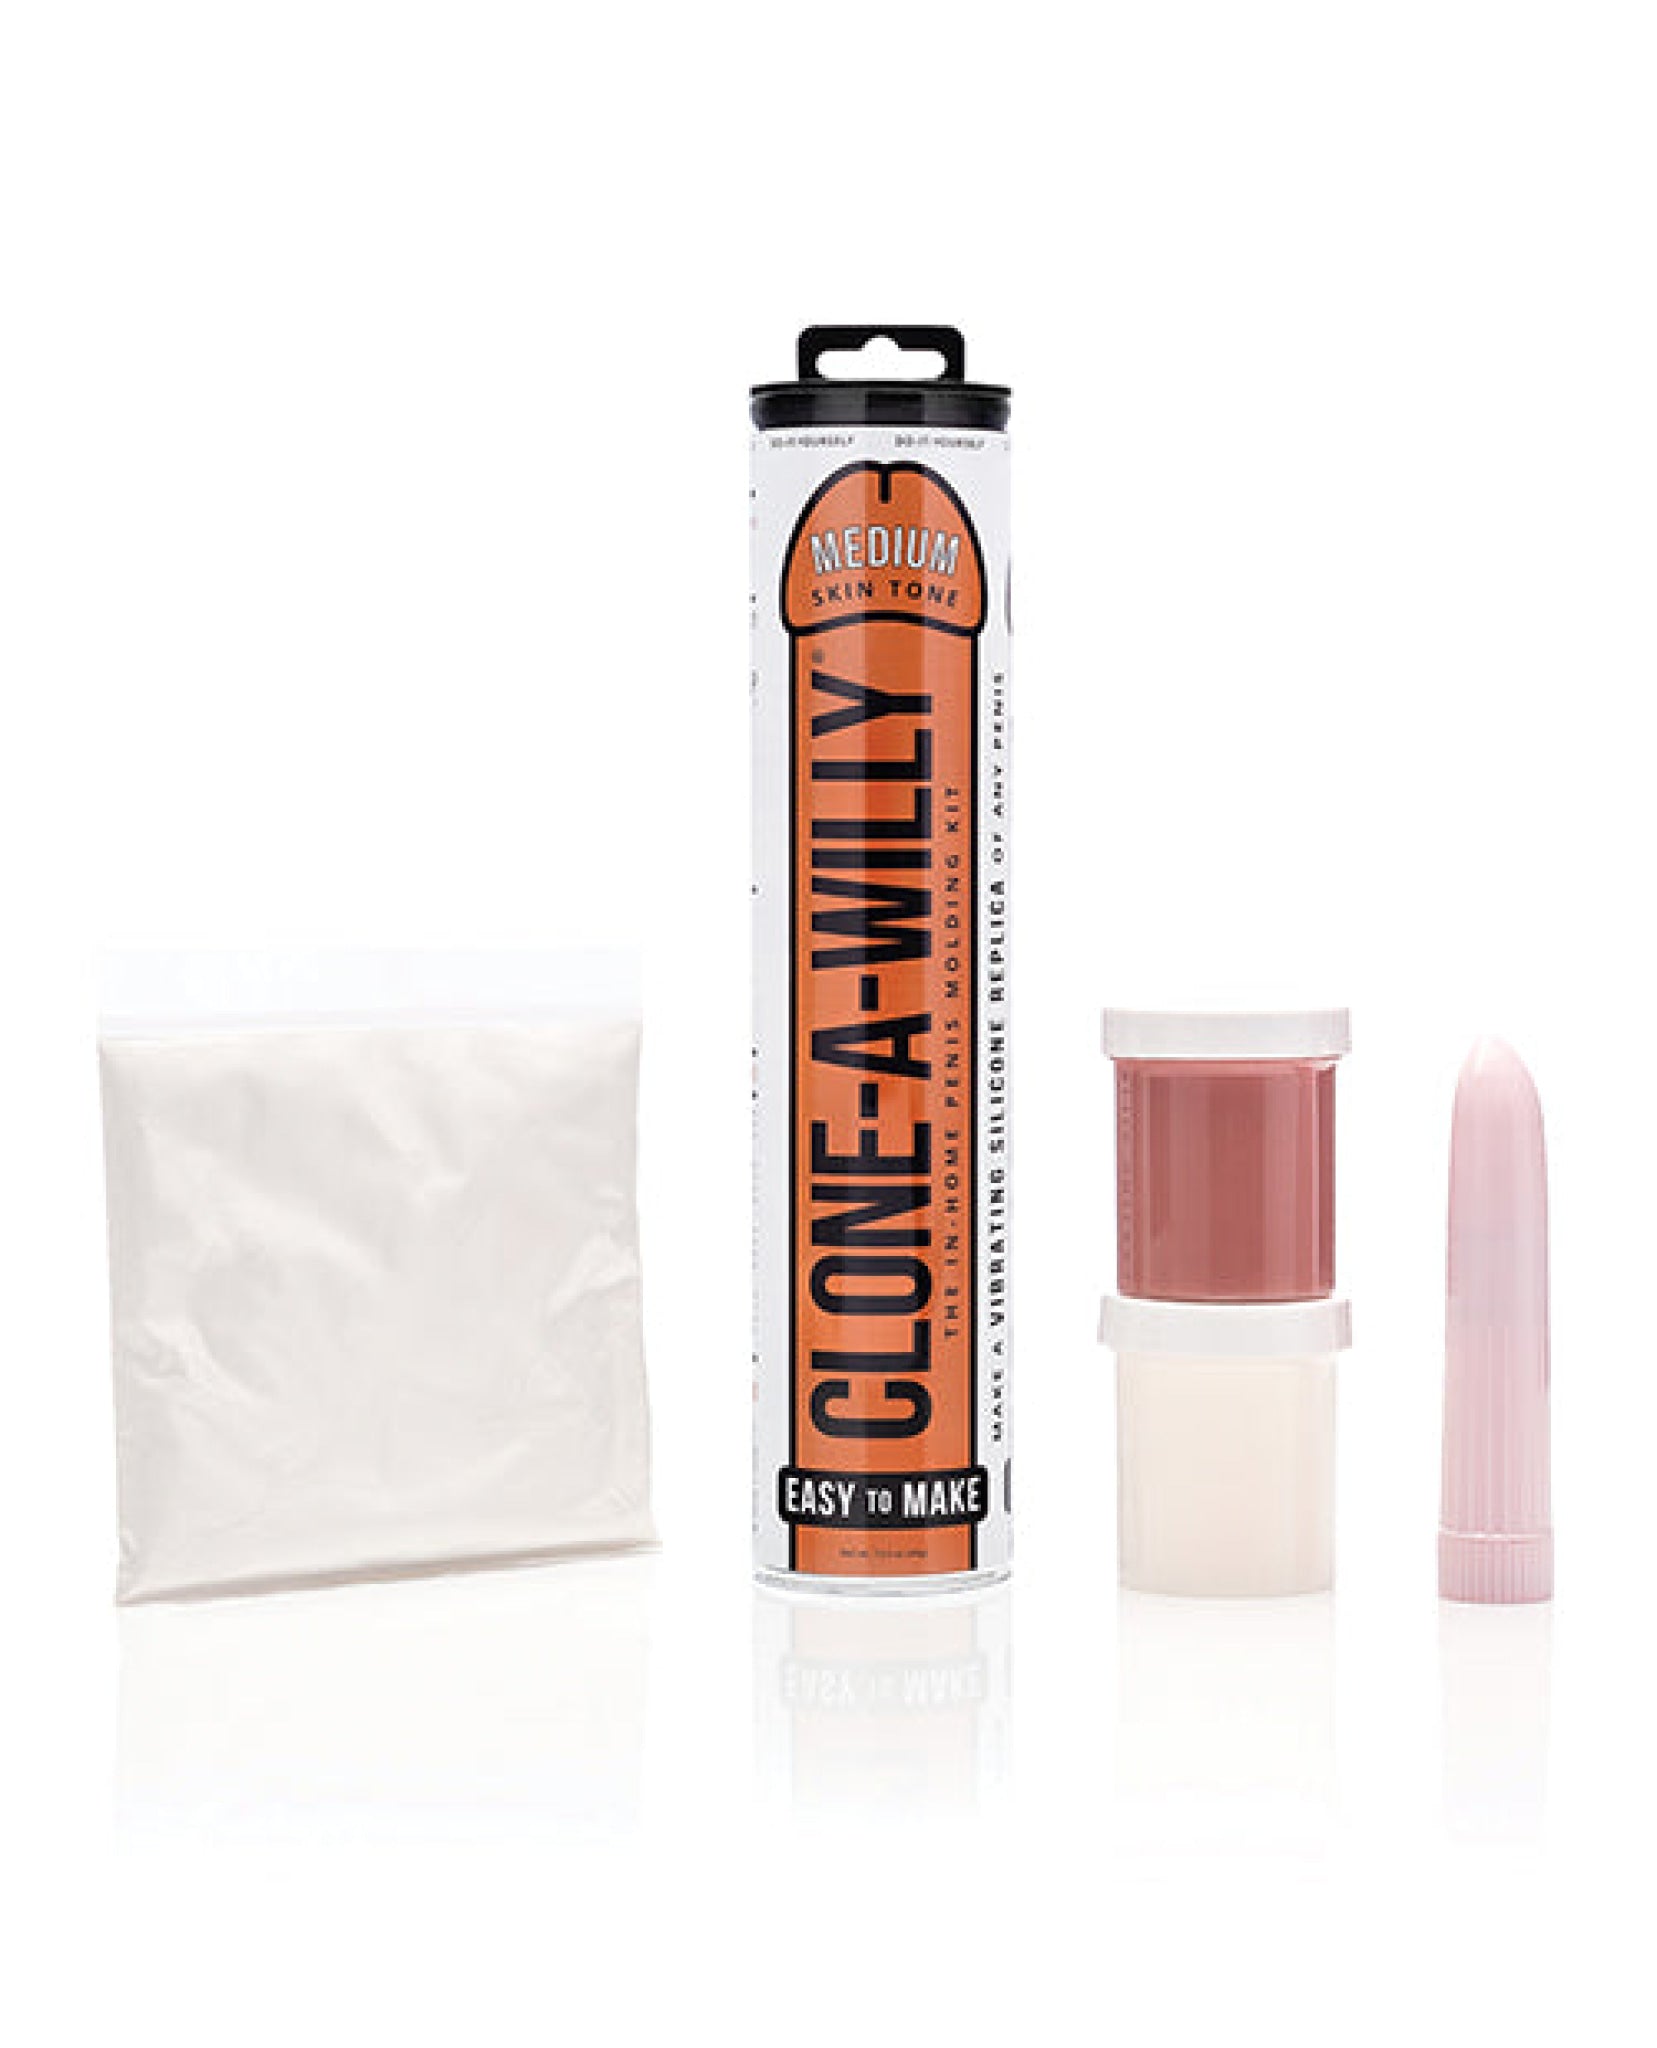 Clone-a-willy Silicone Kit - Medium Skin Tone Clone A Willy